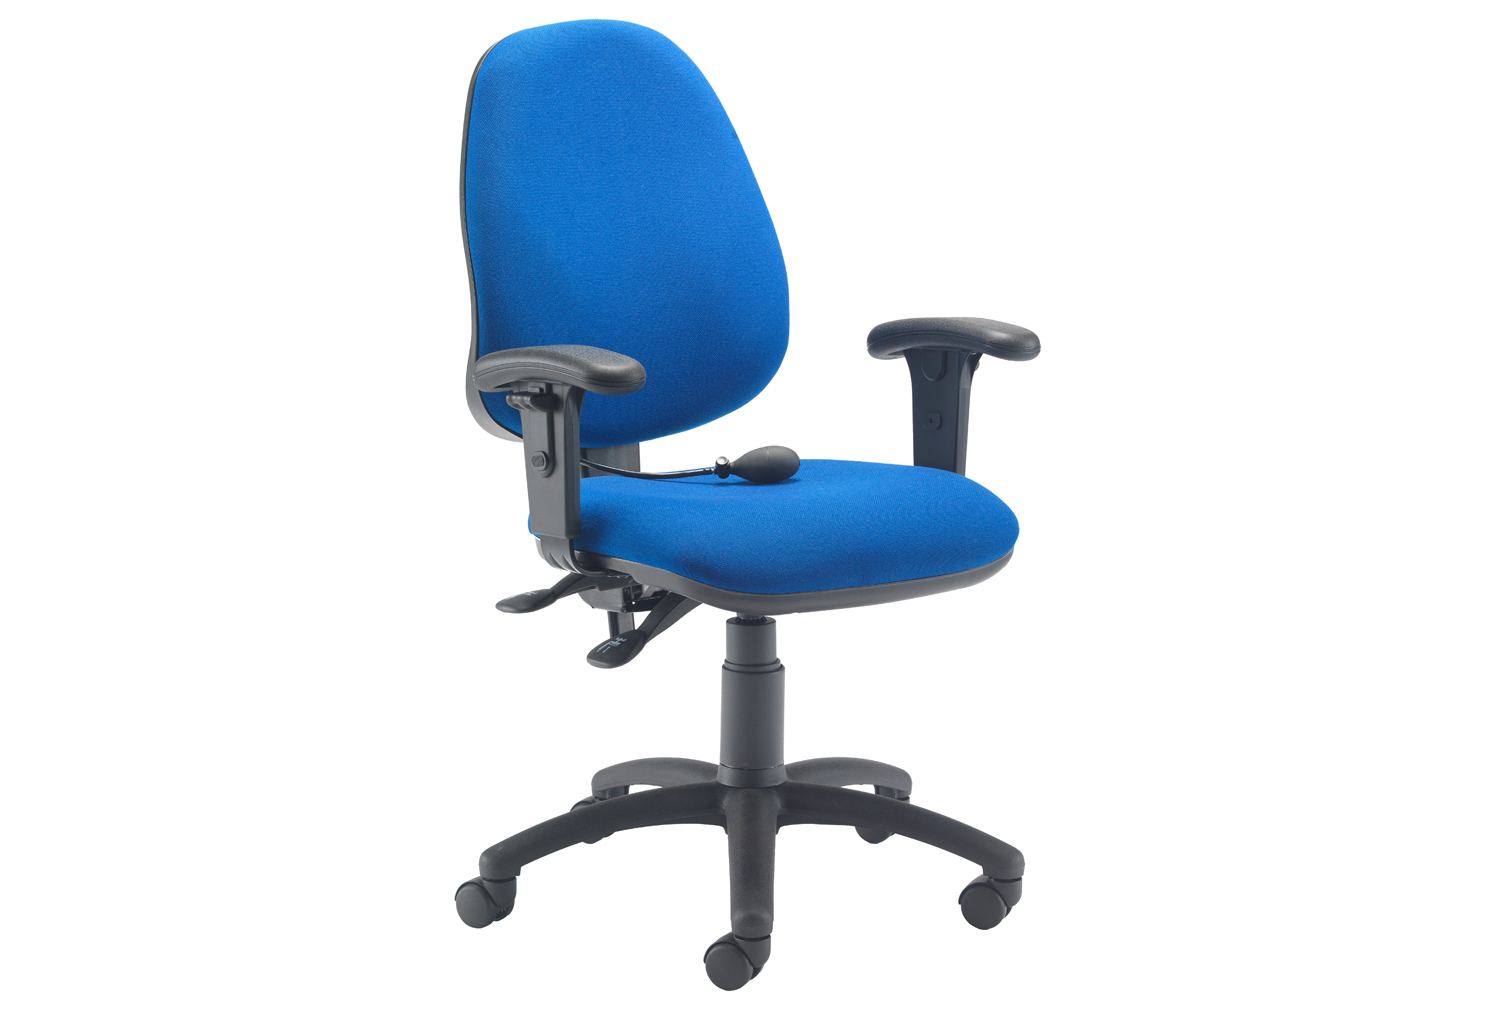 Orchid Lumbar Pump Ergonomic Operator Office Chair With Height Adjustable Arms, Blue, Fully Installed